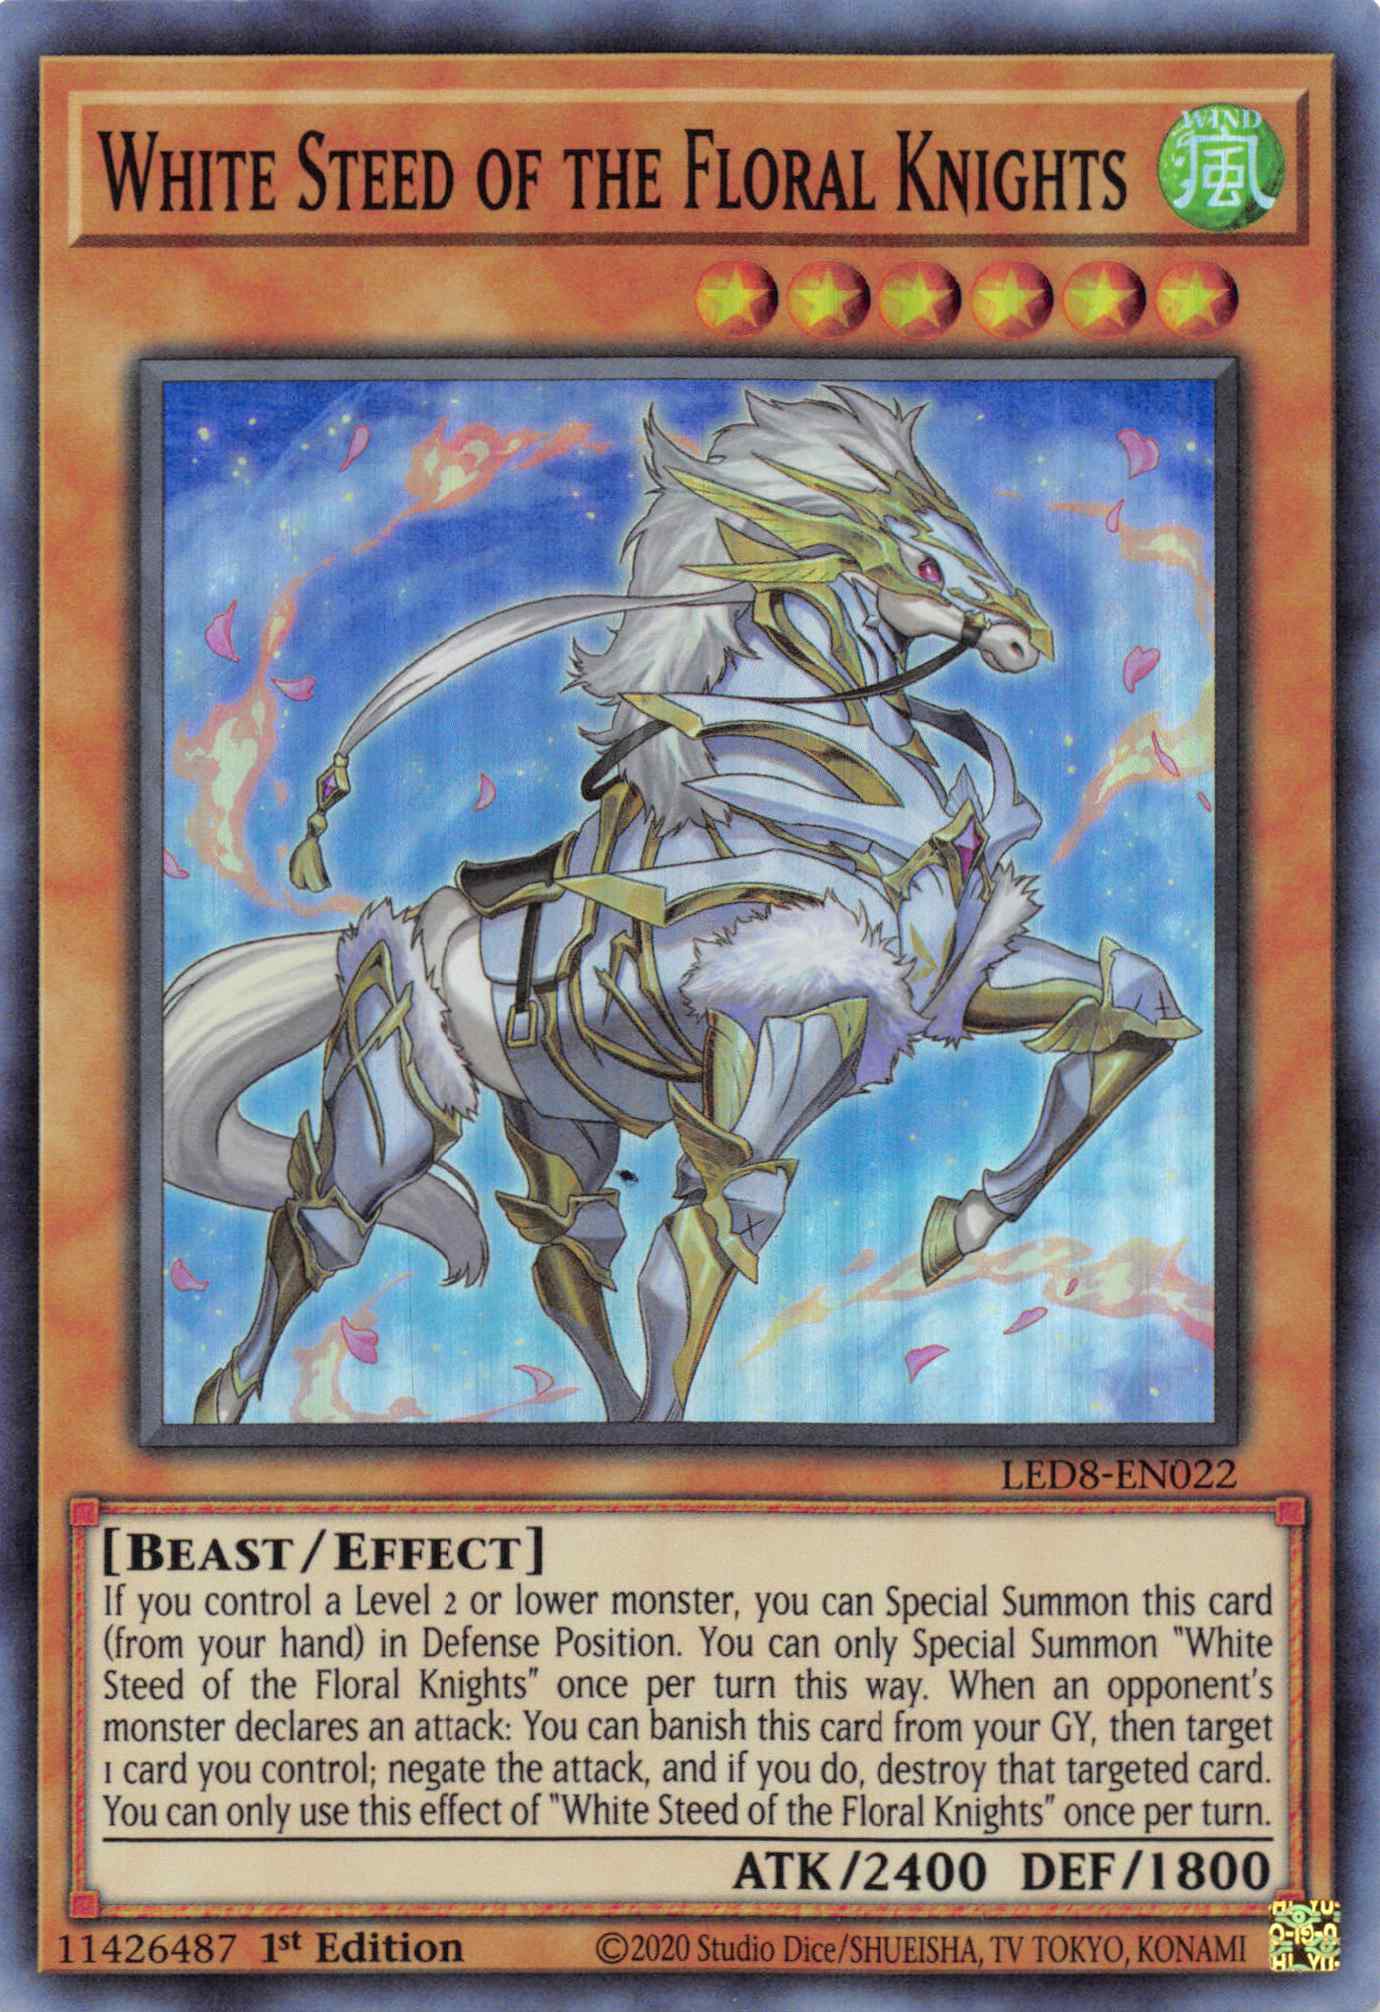 White Steed of the Floral Knights [LED8-EN022] Super Rare | L.A. Mood Comics and Games